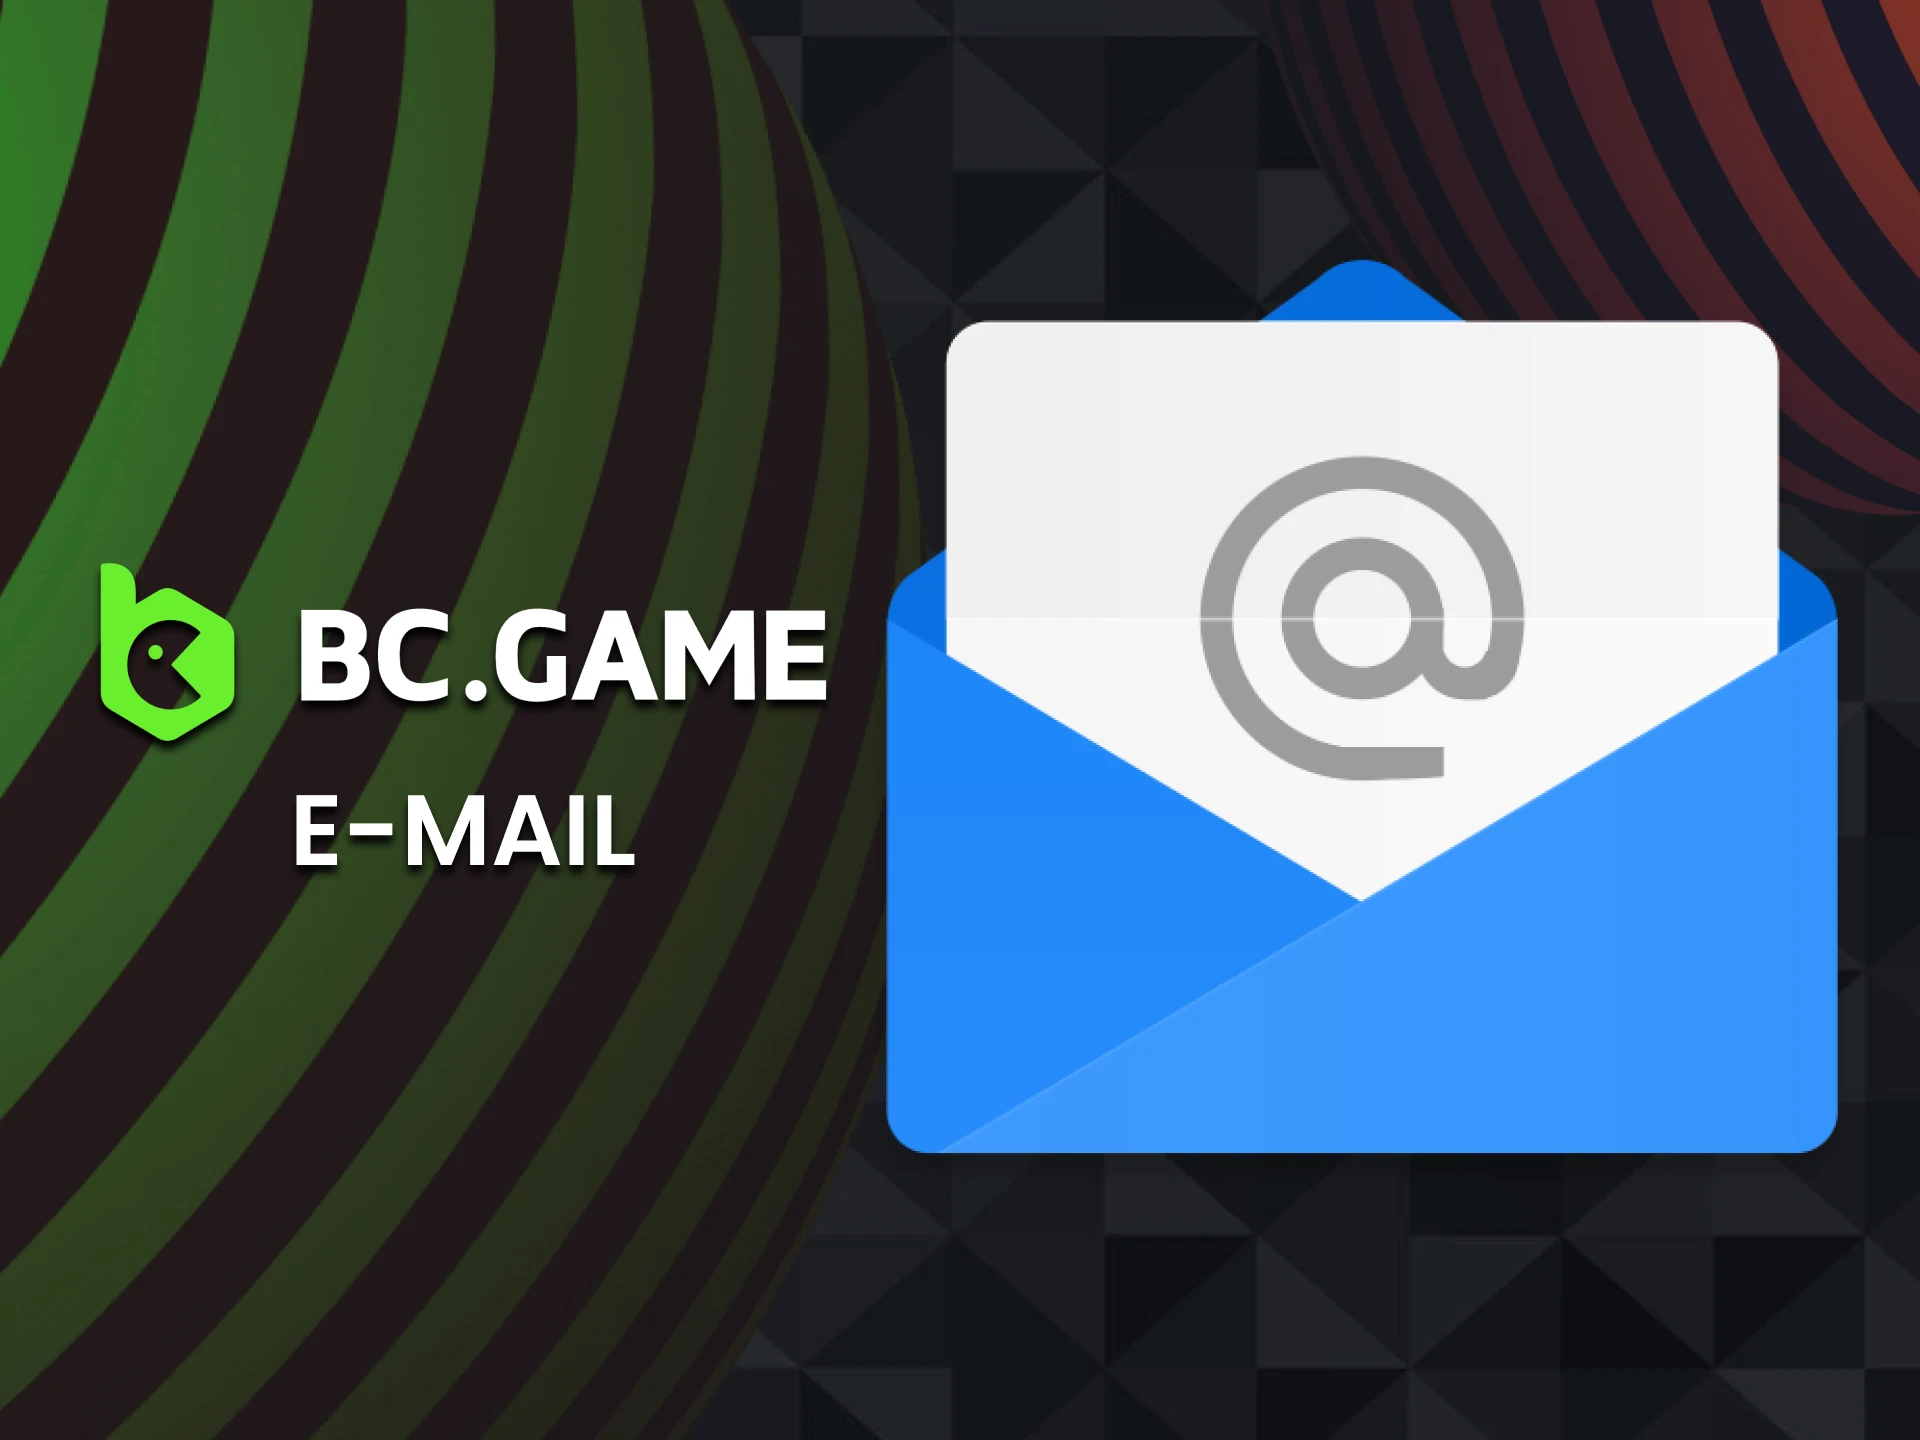 You can contact the BC Game support team via email.